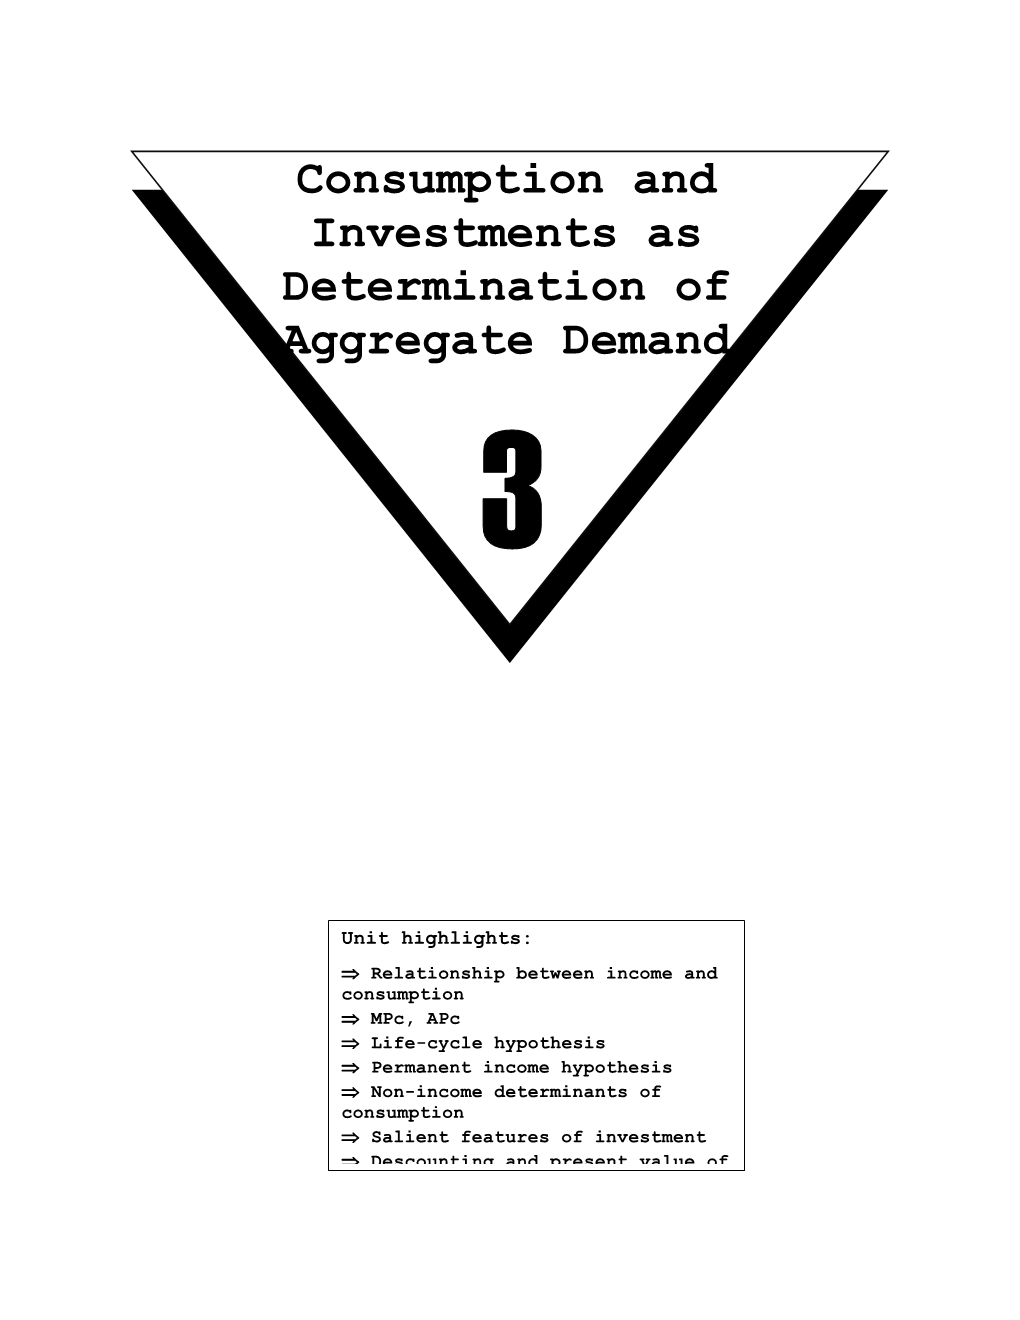 Consumption and Investments As Determination of Aggregate Demand